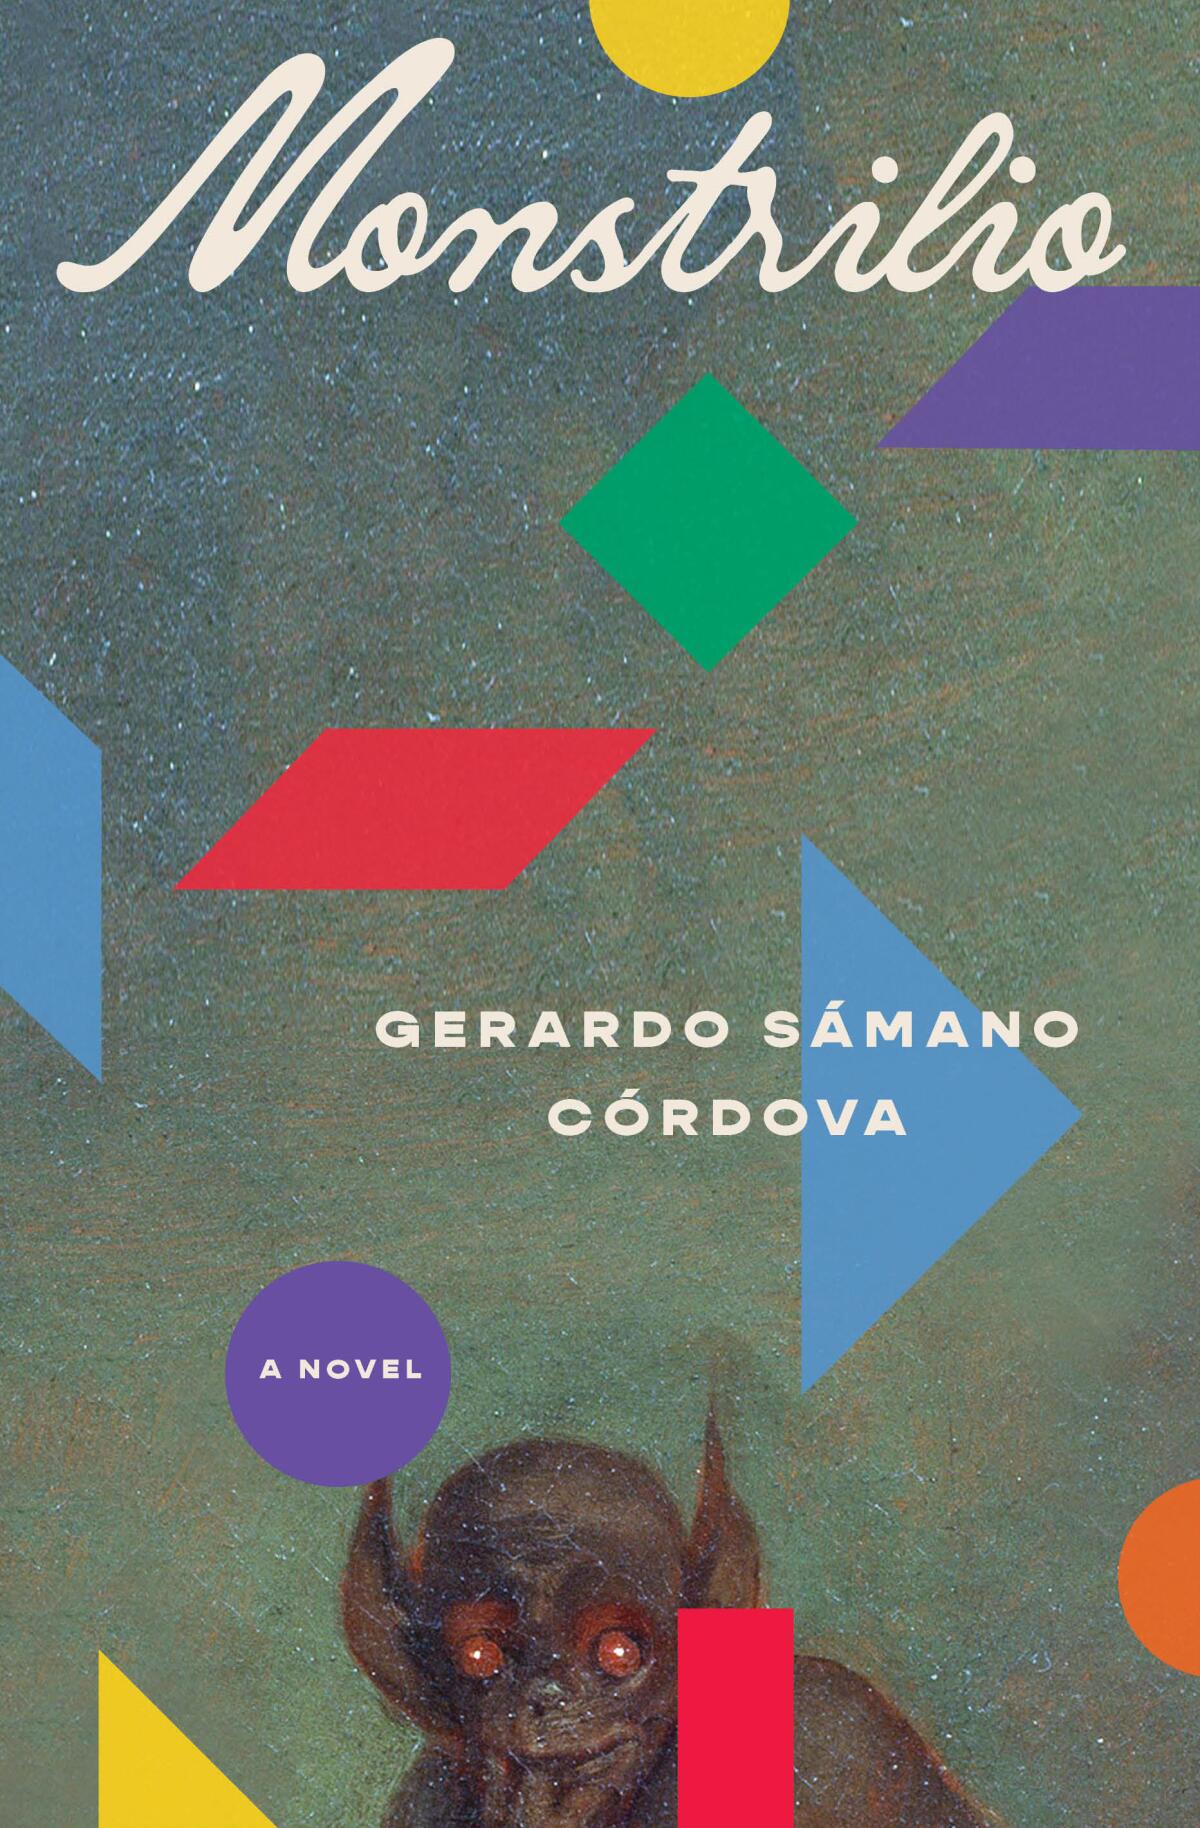 The book cover of 'Monstrilio,' by Gerardo Samano Cordova. Colorful shapes surround the image of a small monster.